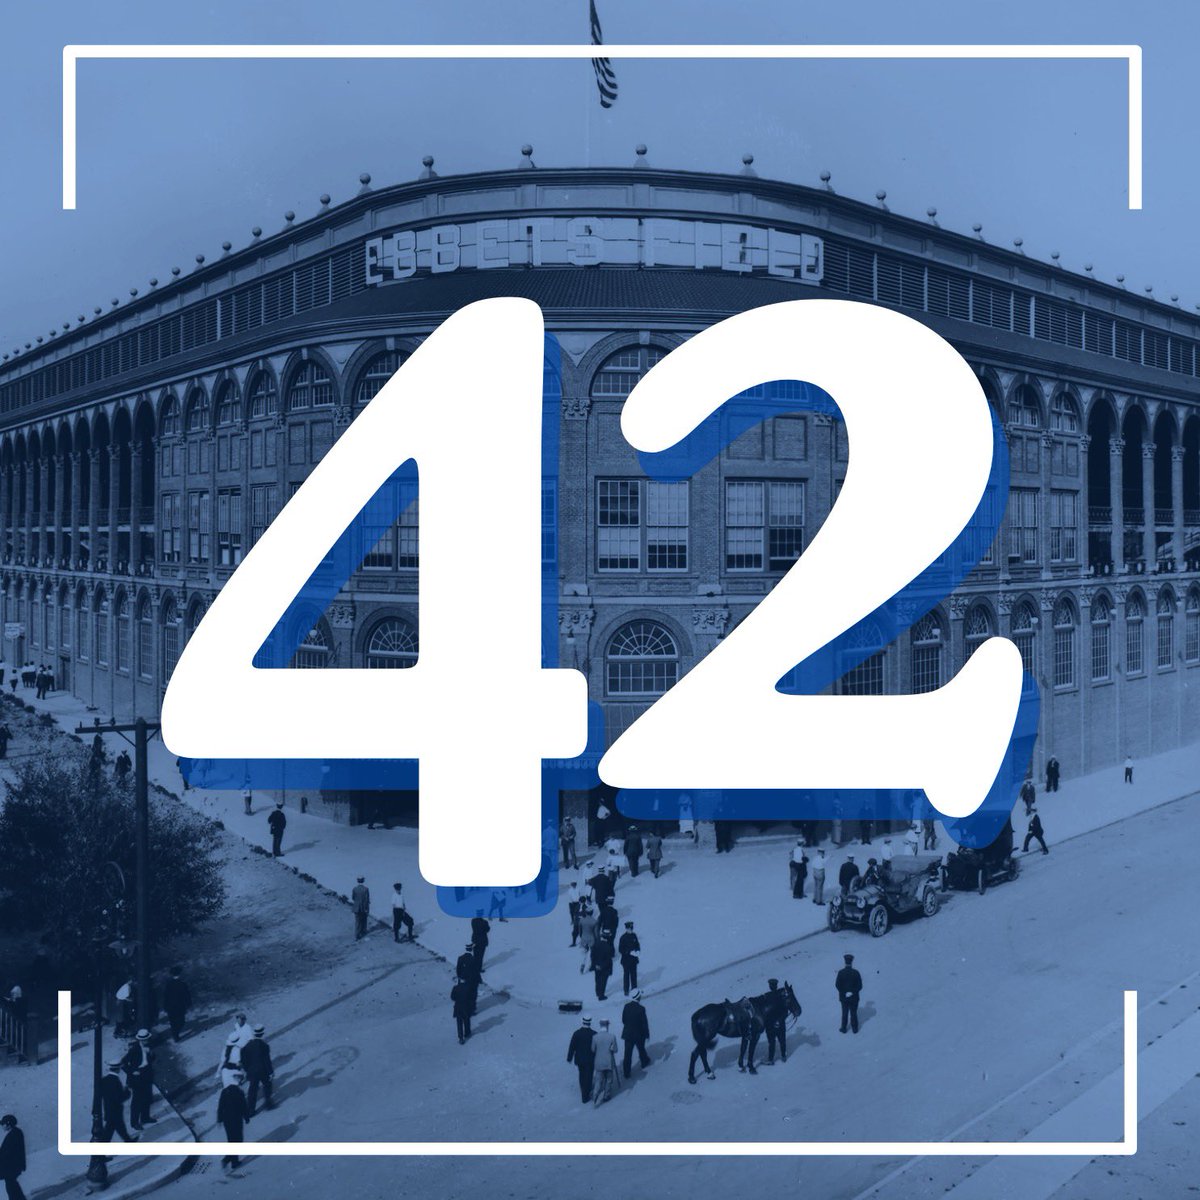 We are proud to recognize the life and legacy of Jackie Robinson, who made his historic MLB debut with the Brooklyn Dodgers on April 15, 1947. #Jackie42